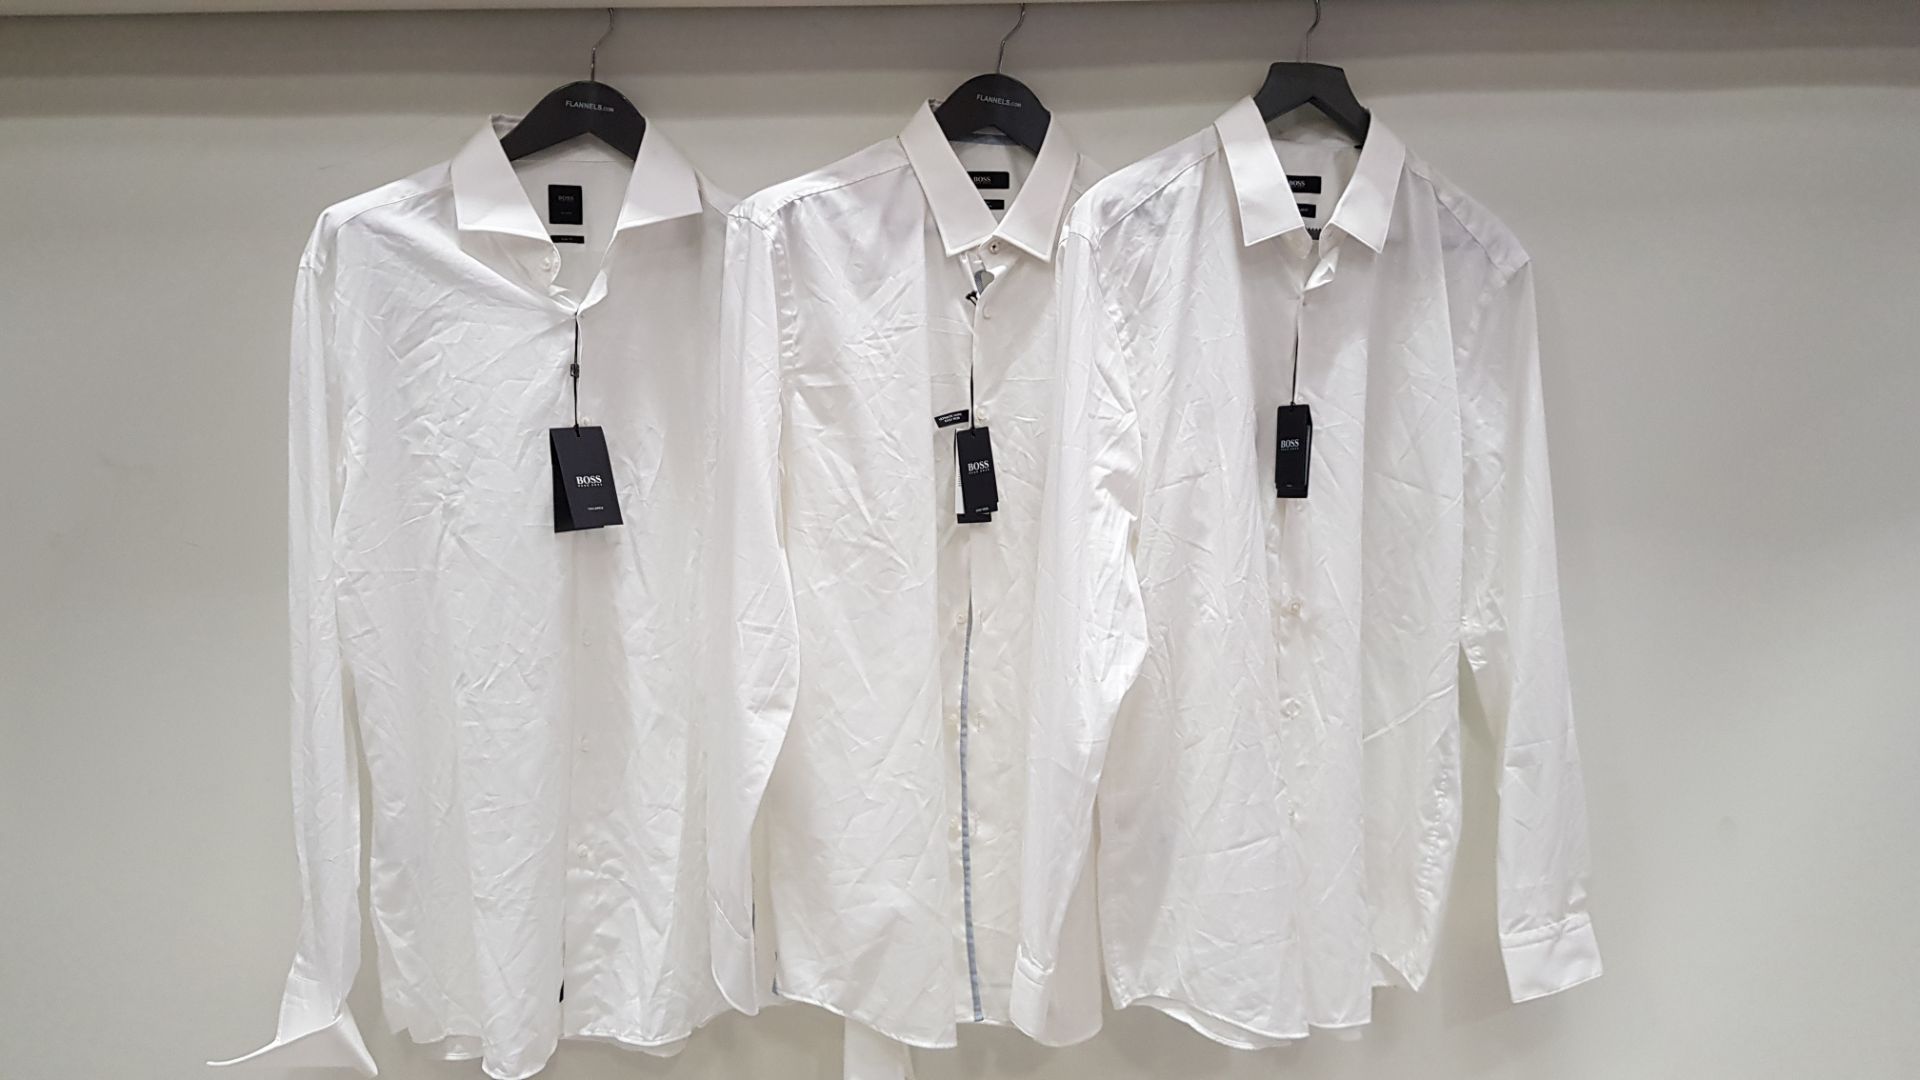 5 X BRAND NEW HUGO BOSS SHIRTS IN VARIOUS STYLES ( MAINLY SIZE 17) (PLEASE NOTE SHIRTS ARE CREASED